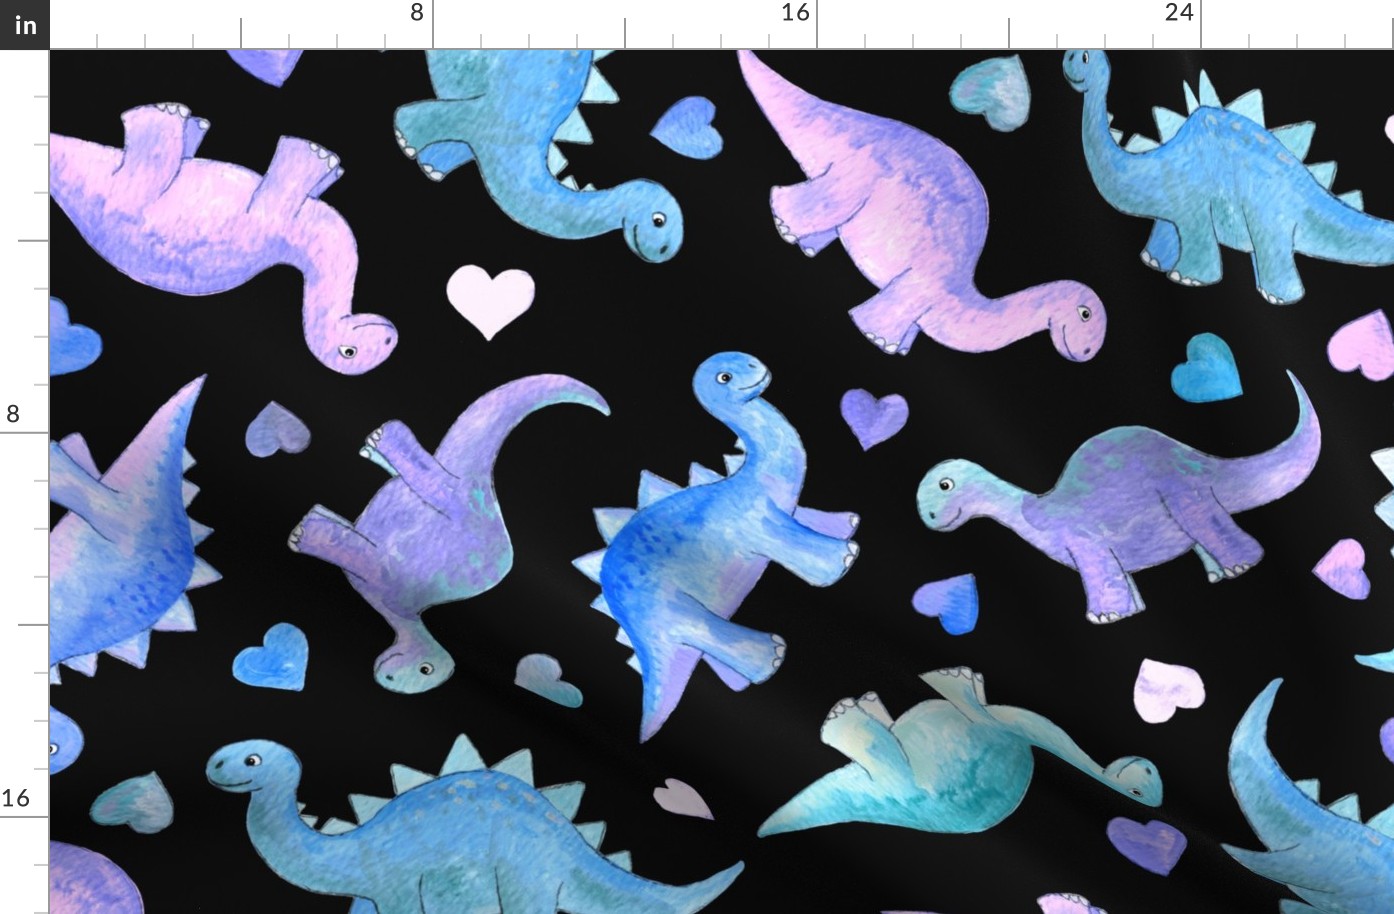 Blue, Teal & Purple Hand Painted Gouache Dinos & Hearts on Black - Large